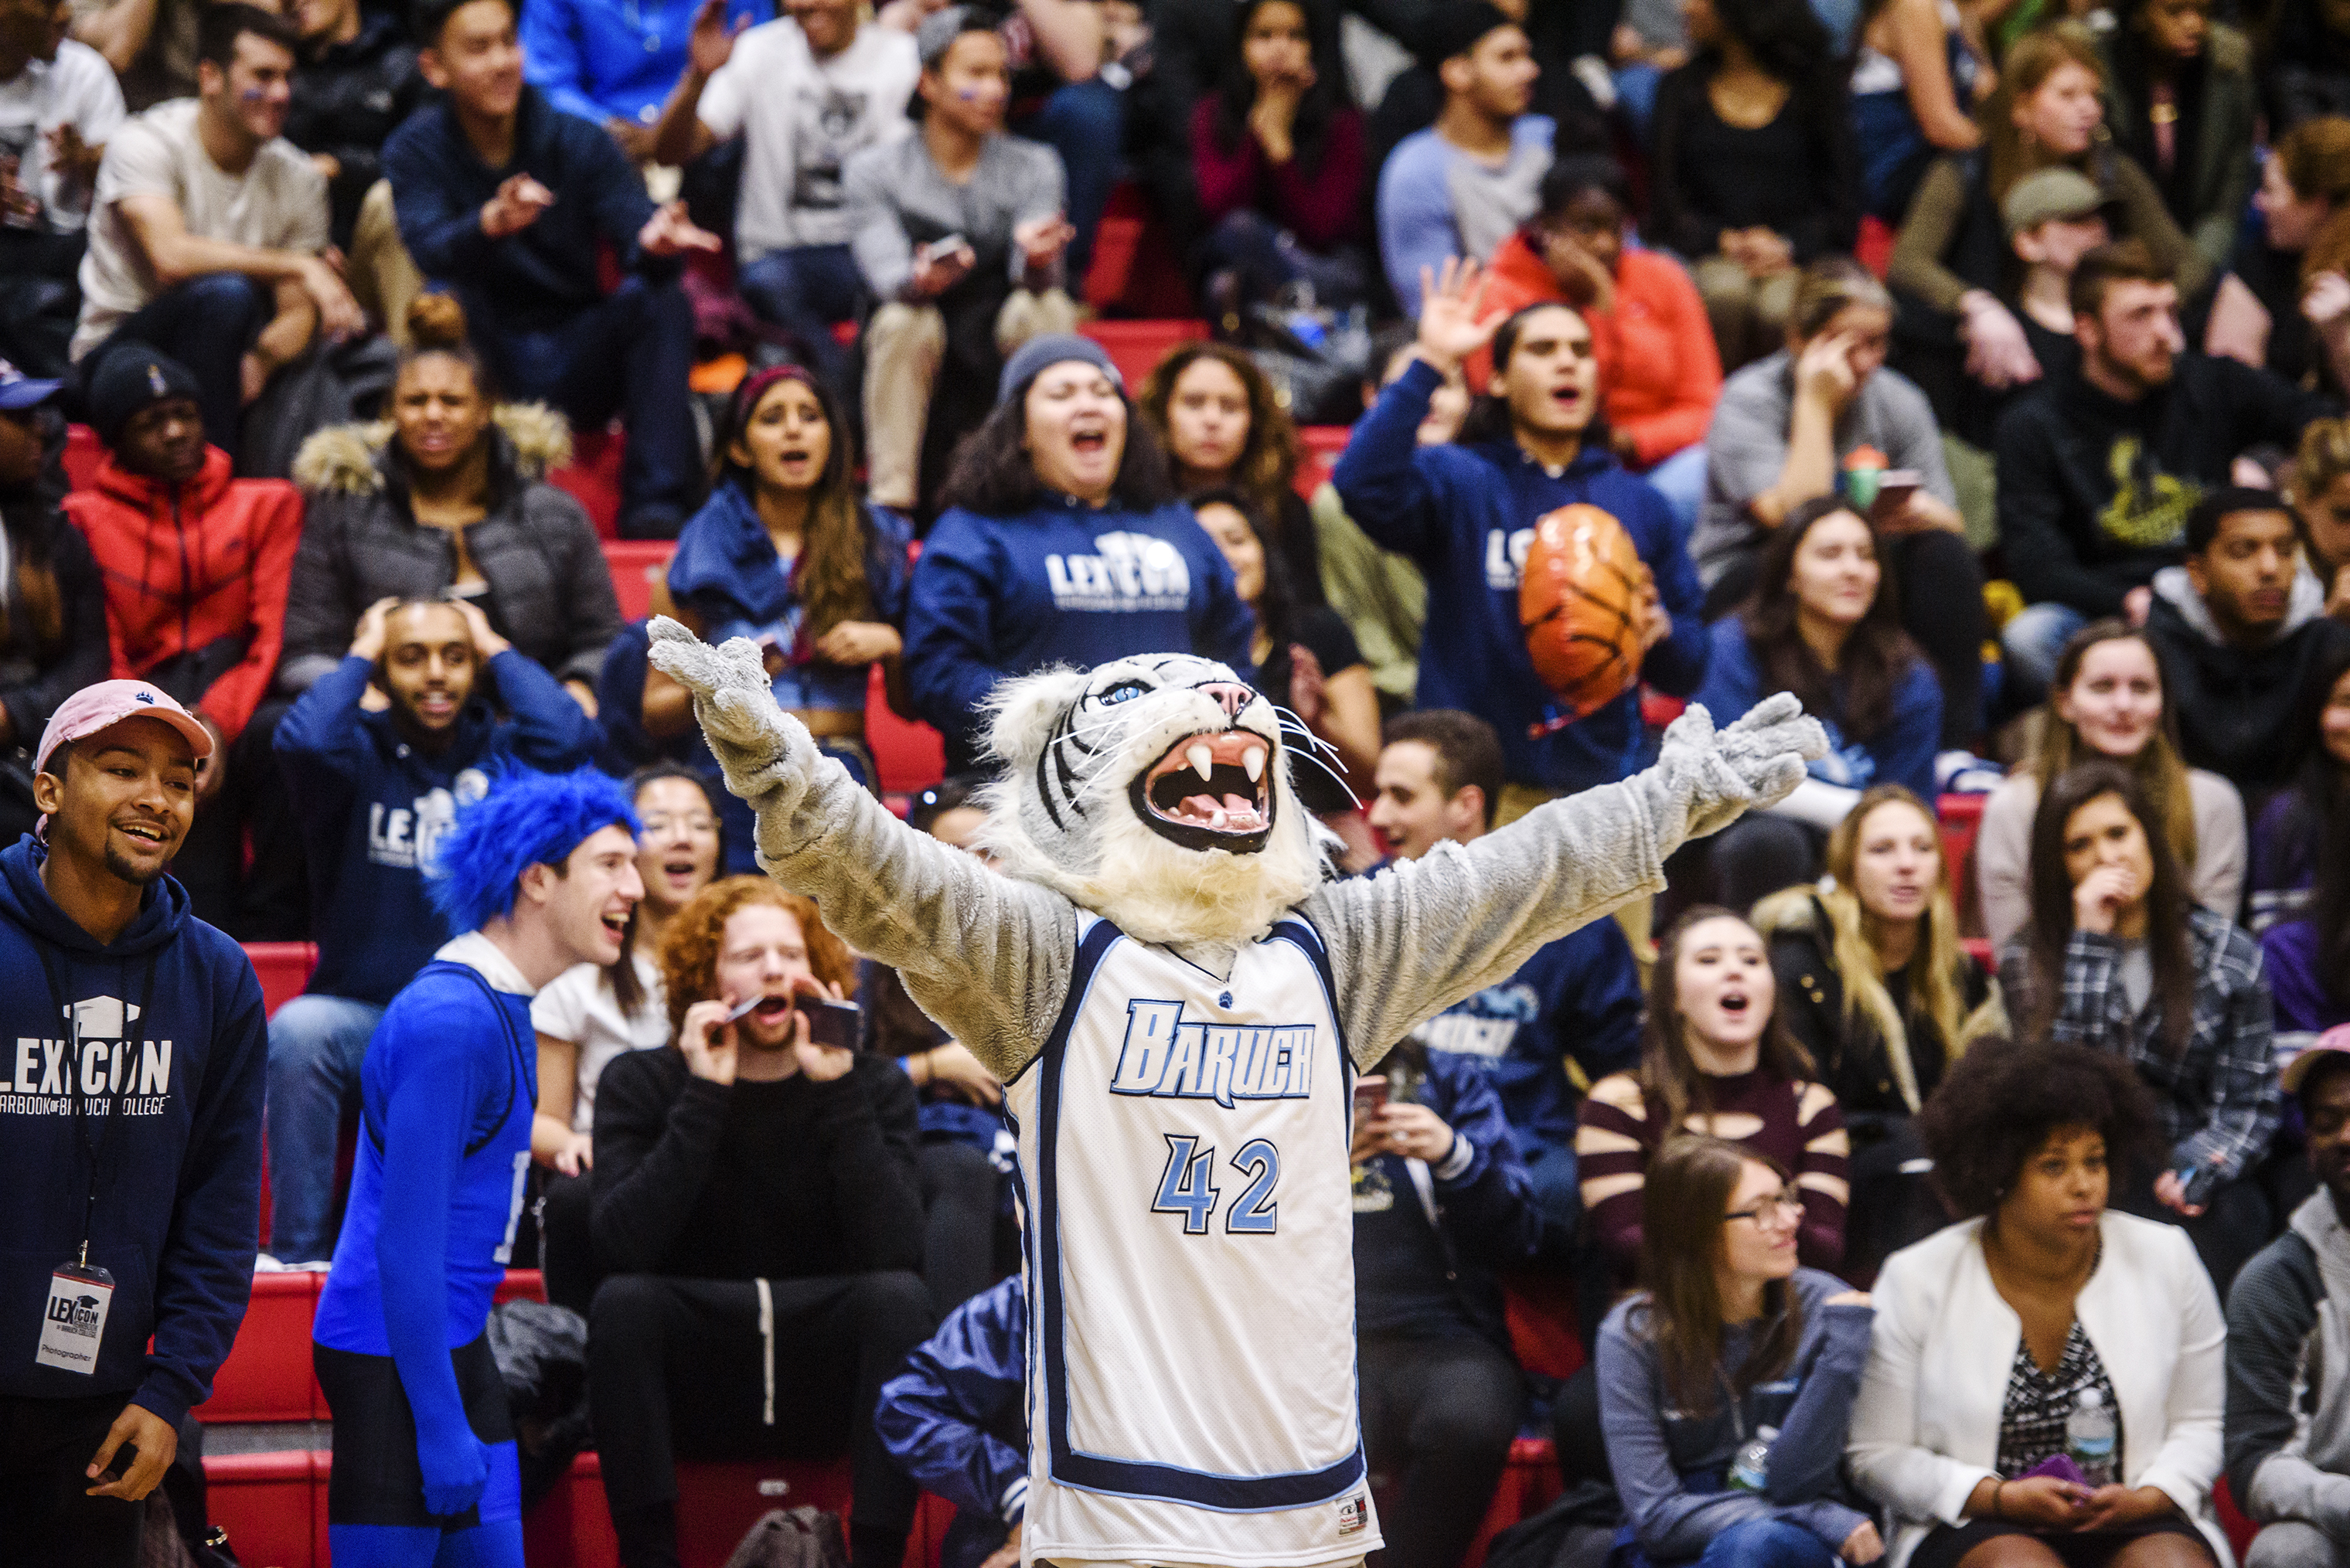 Baruch College's Bearcat cheers on the basketball team.